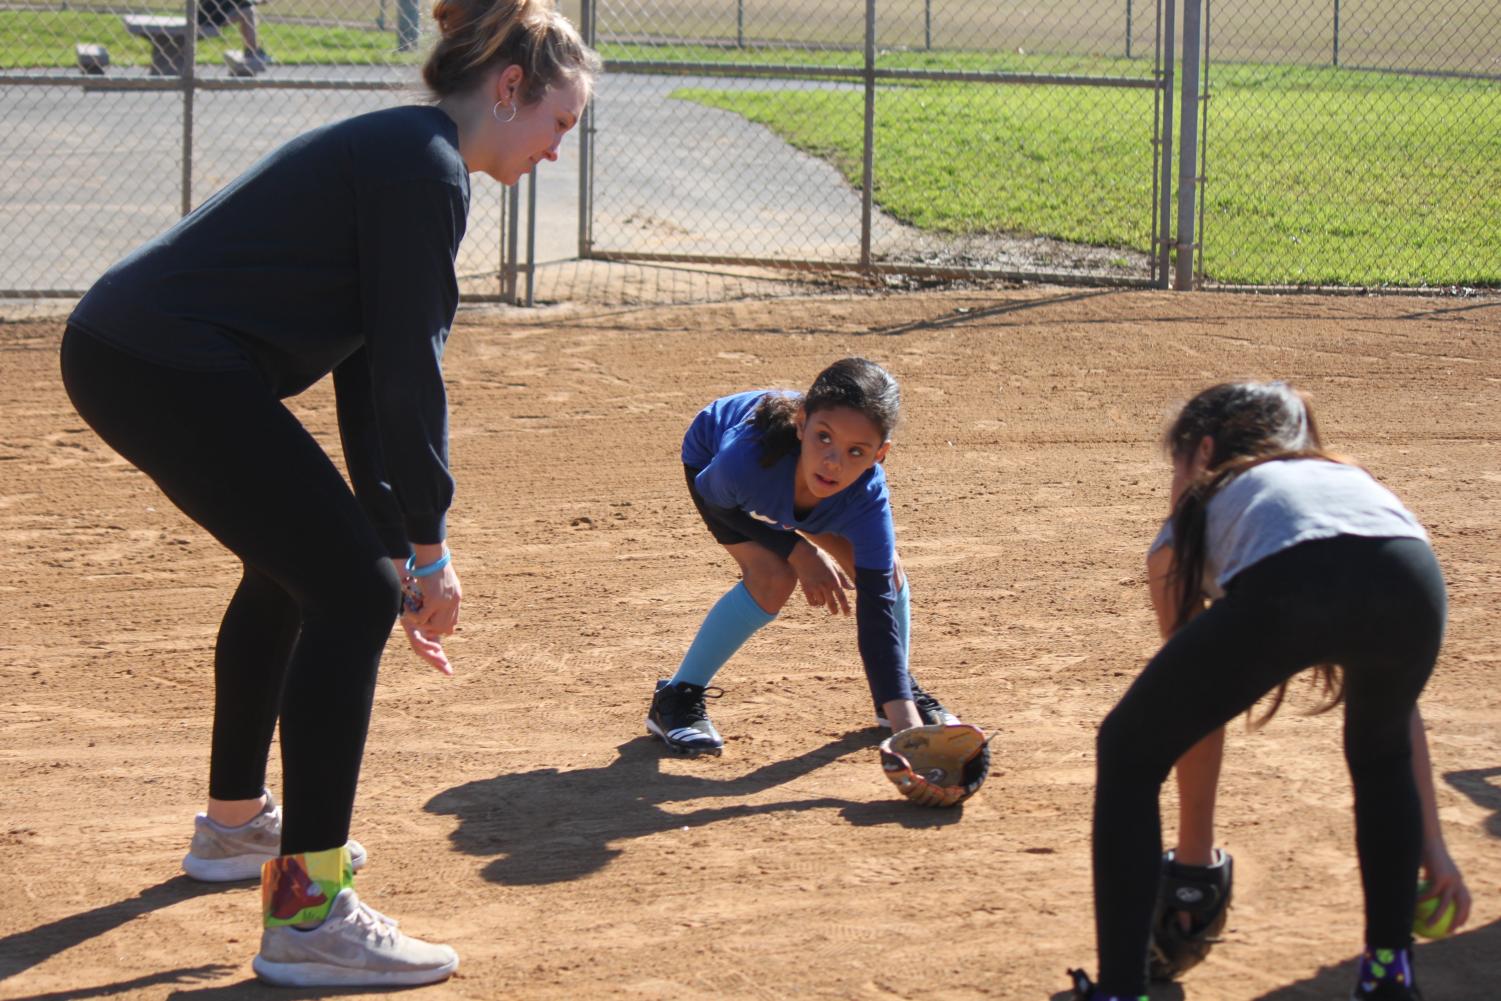 The+softball+team+volunteers+at+a+clinic+to+help+aspiring+young+players